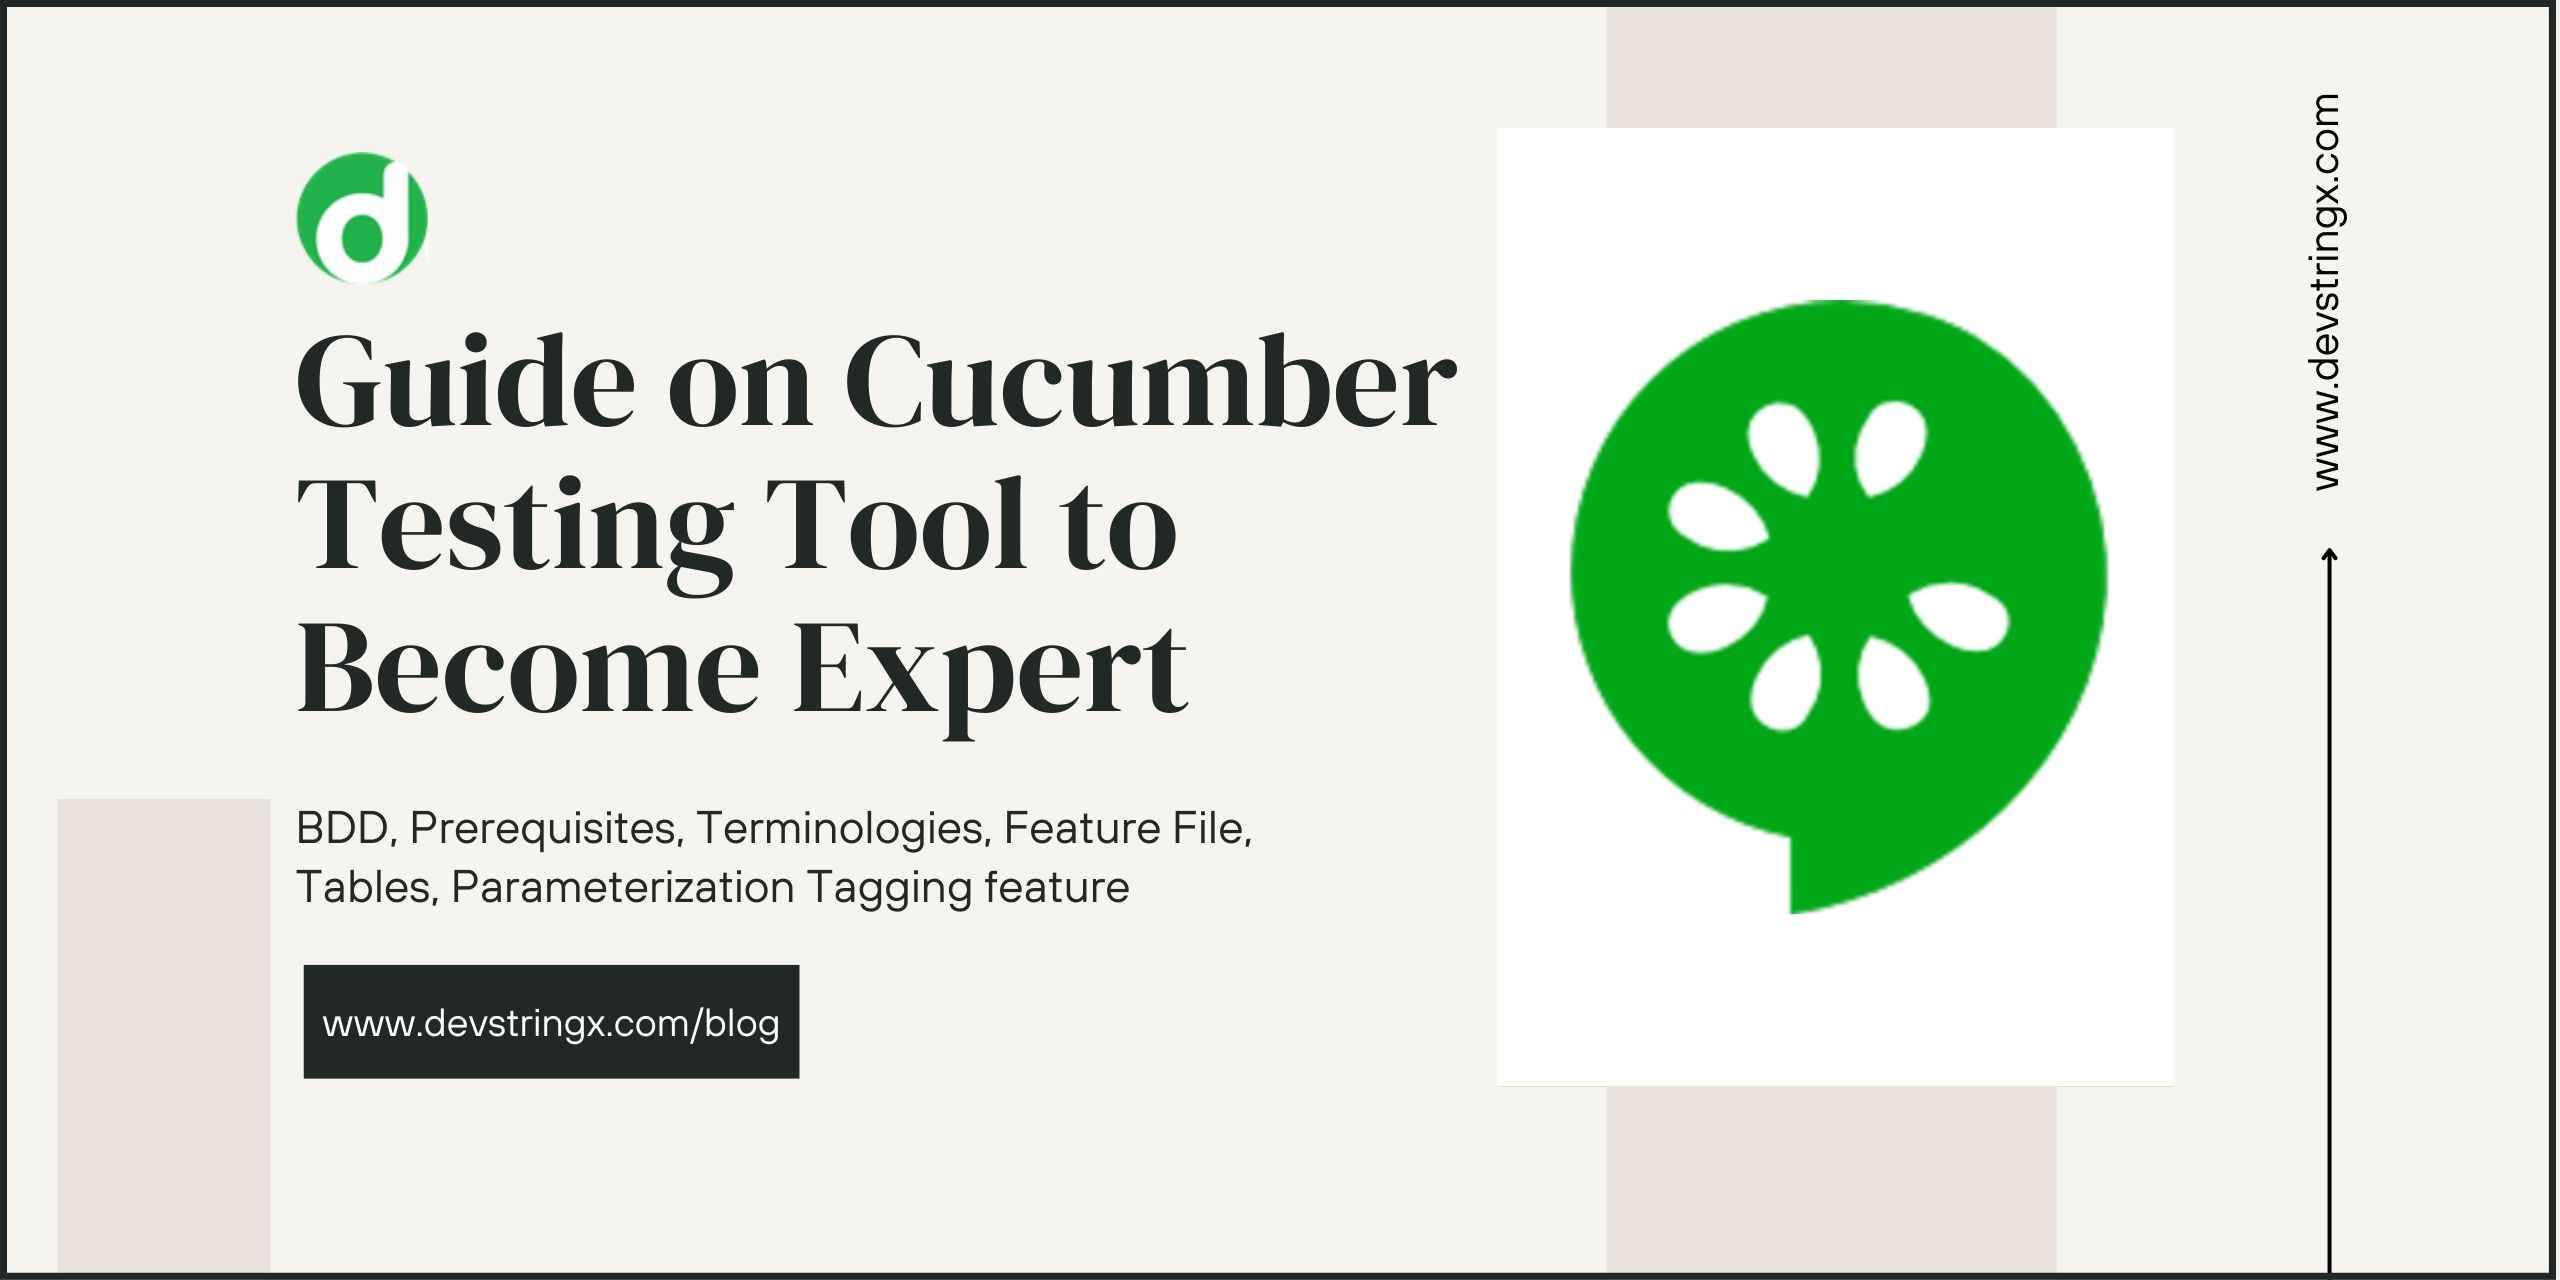 Feature image for cucumber testing blog